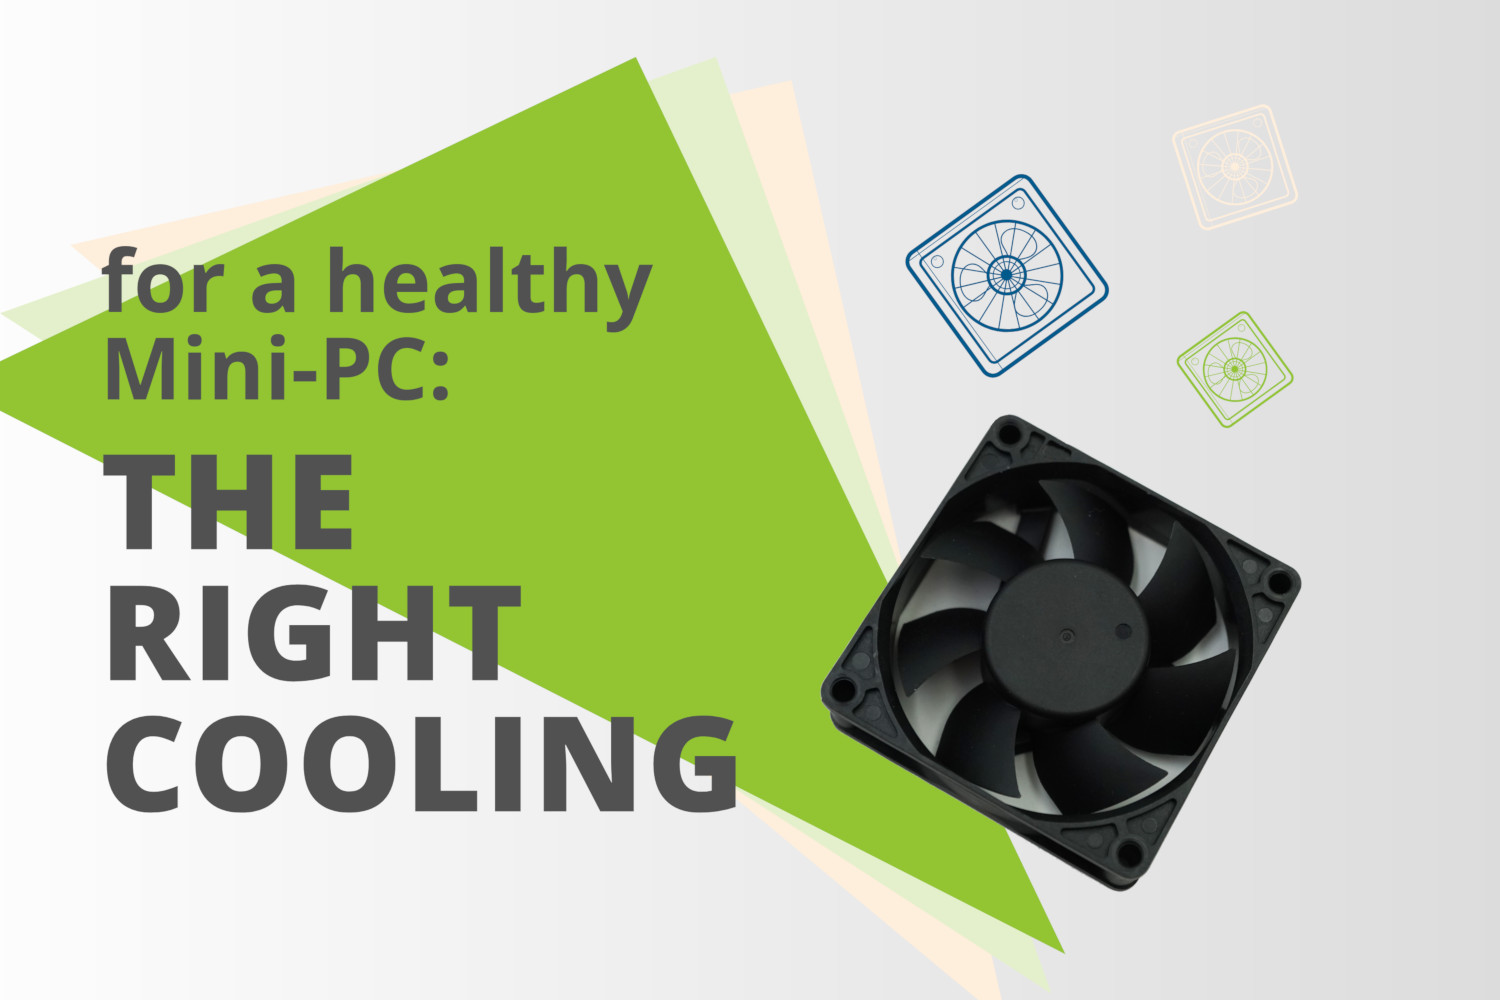 How can a Mini-PC stay healthy? Part 1: The correct cooling